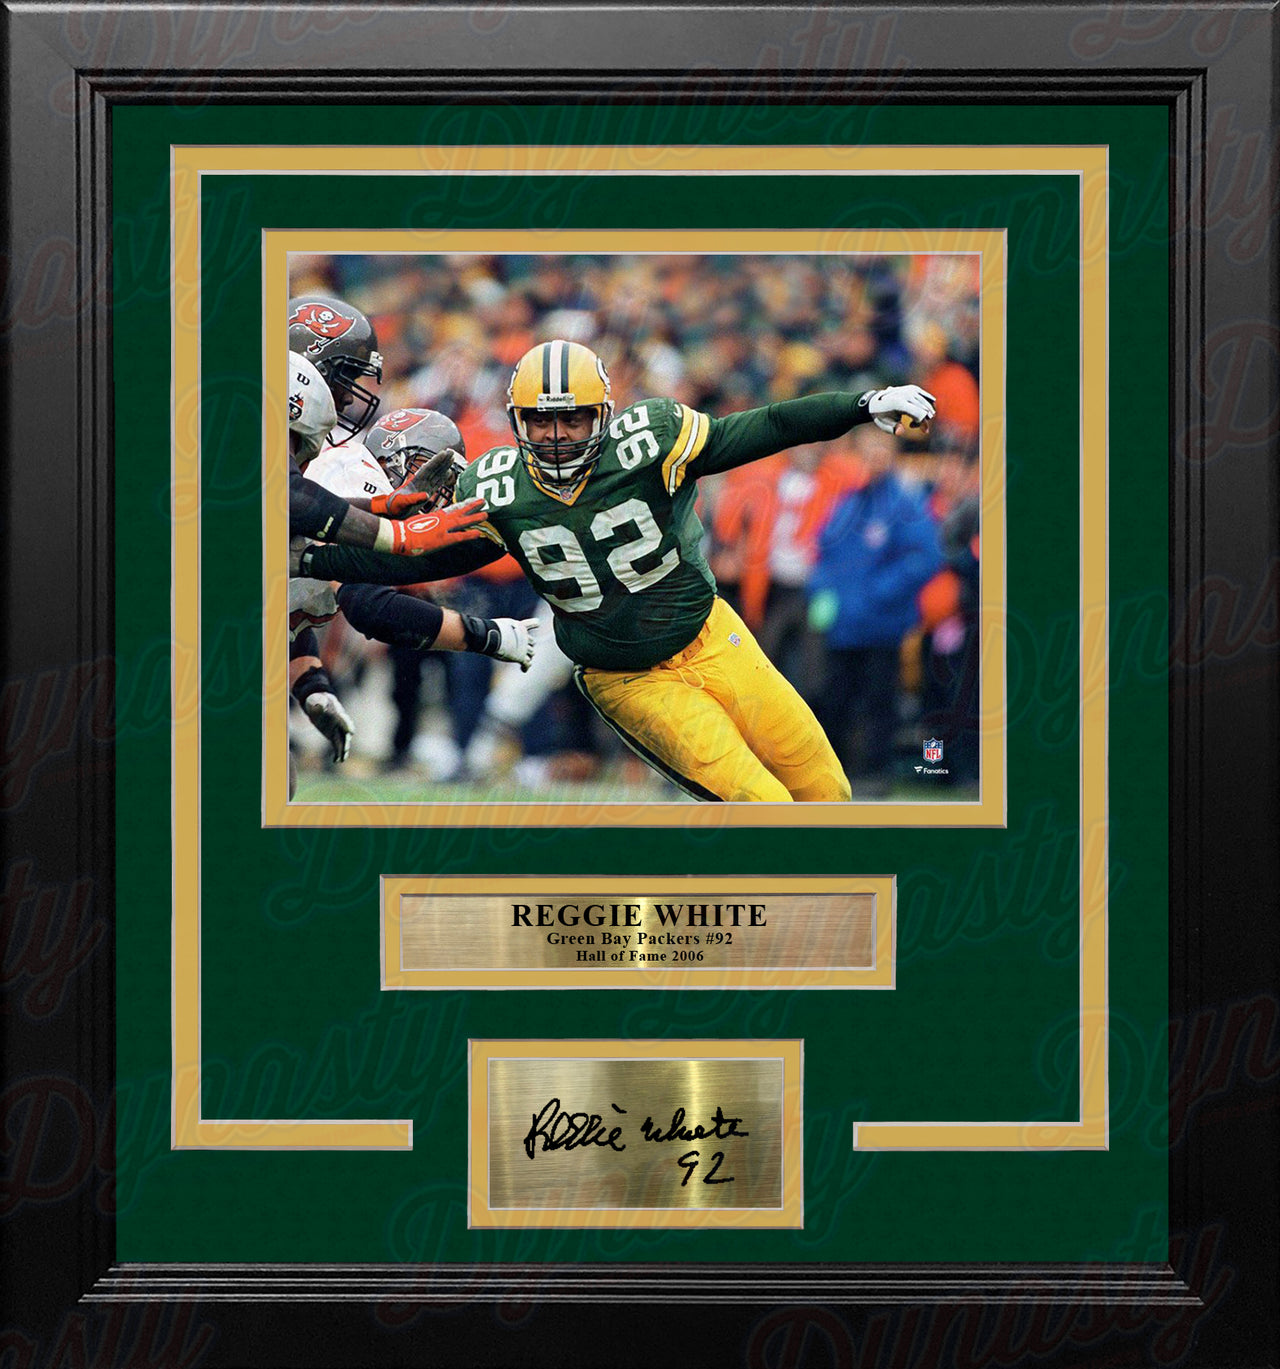 Reggie White in Action Green Bay Packers 8" x 10" Framed Football Photo with Engraved Autograph - Dynasty Sports & Framing 